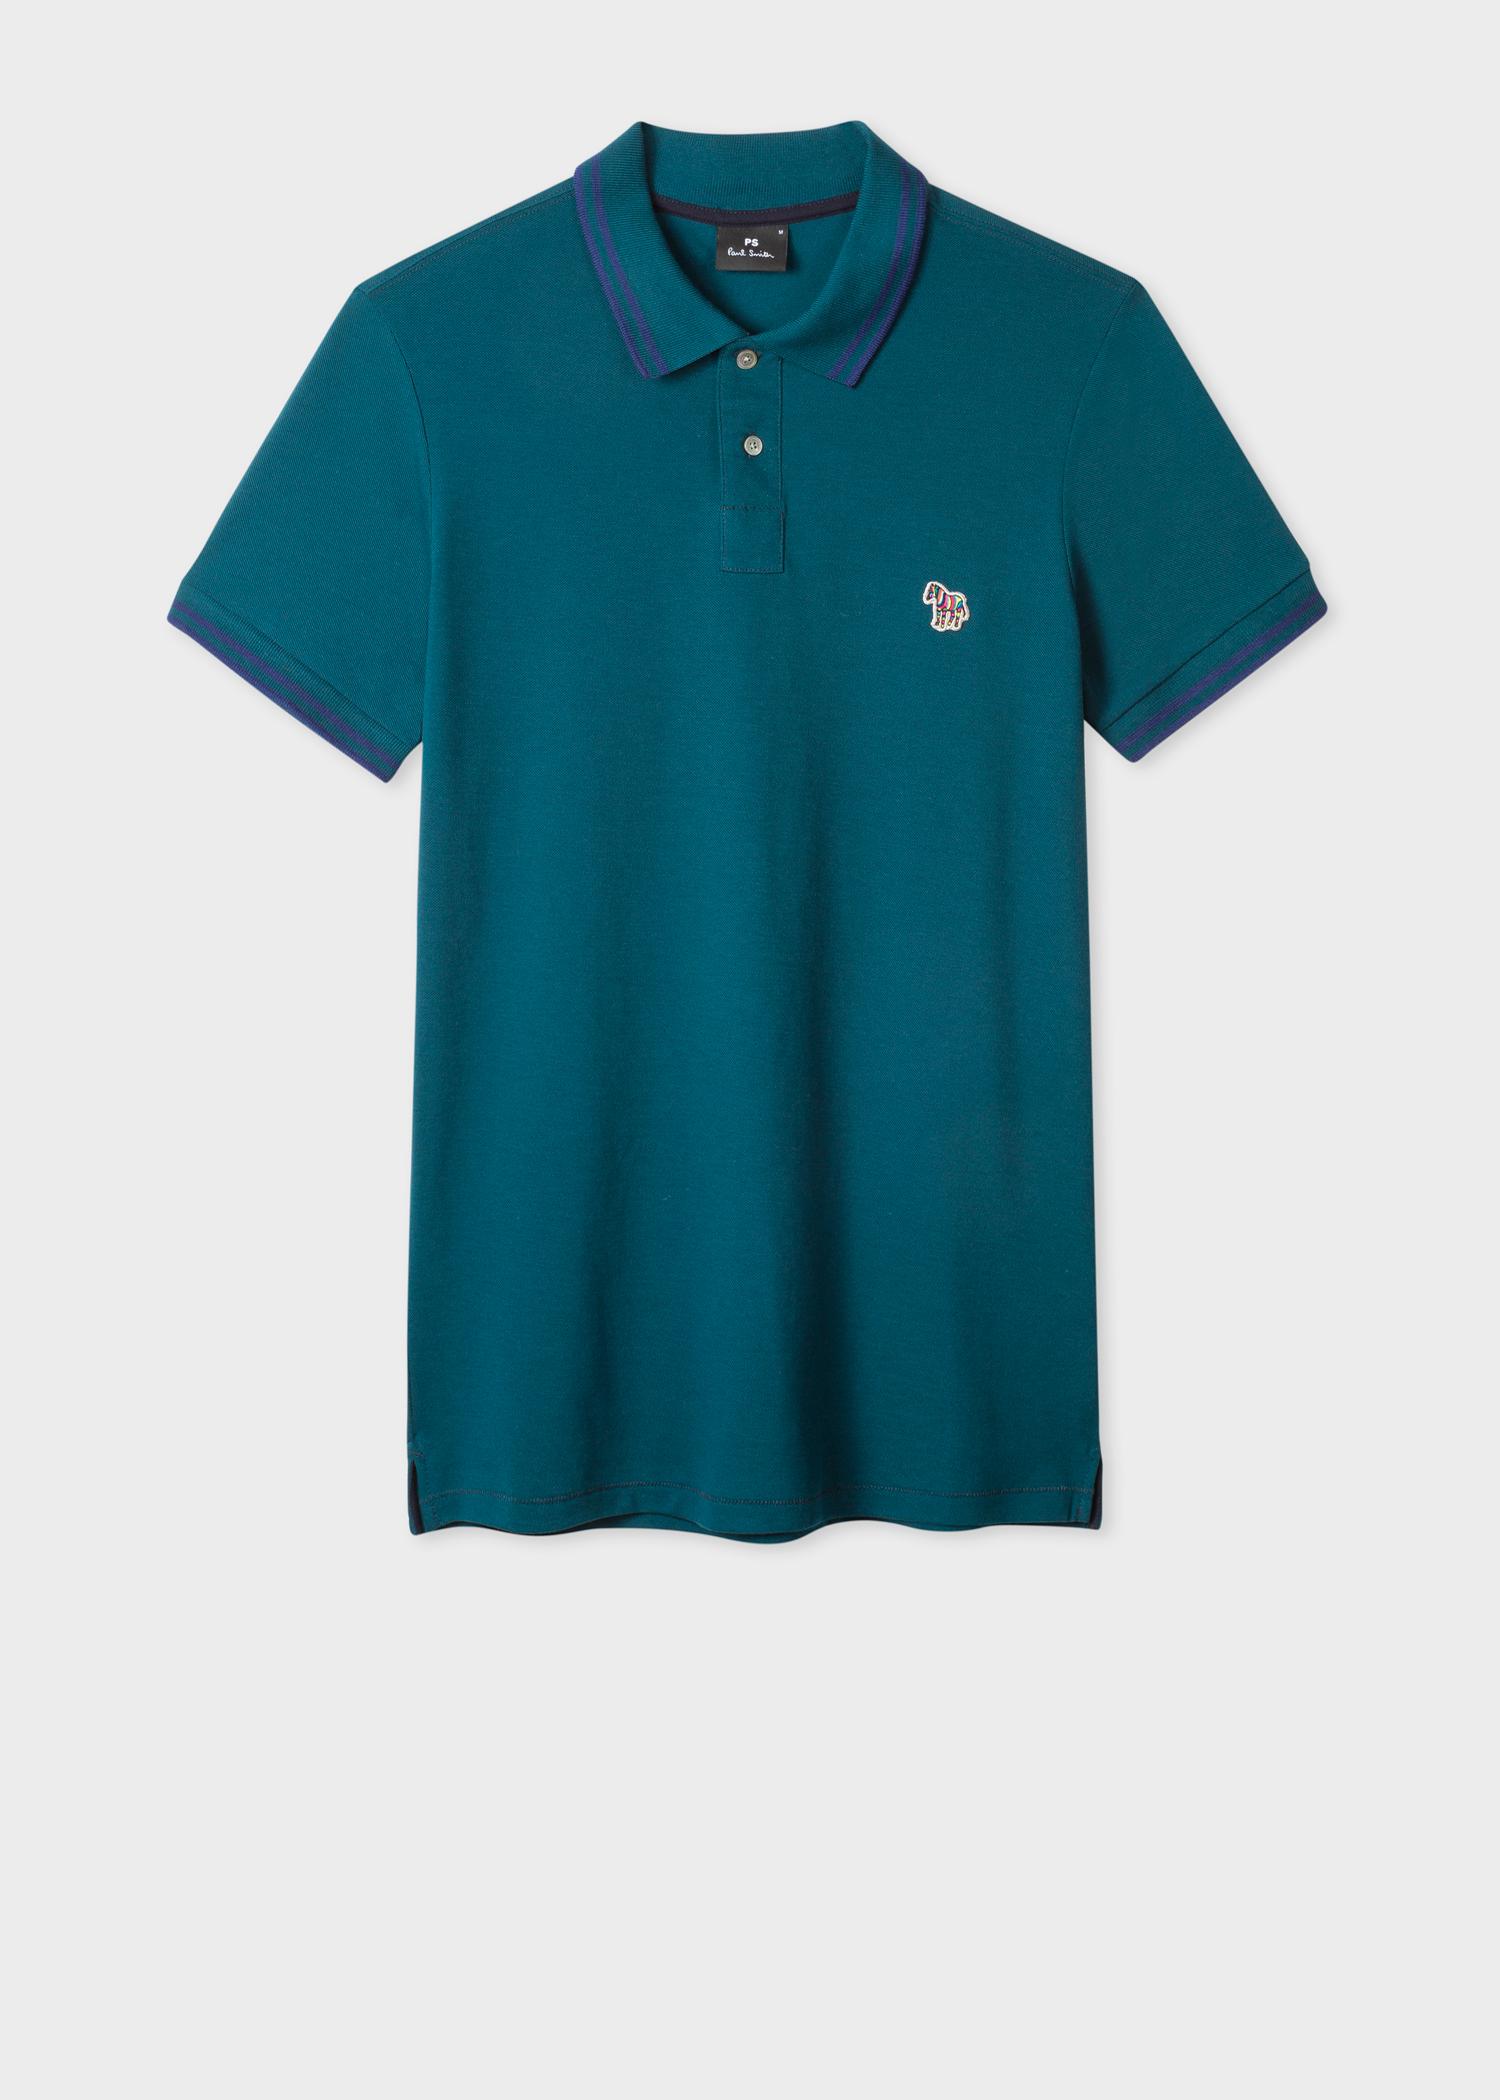 Lyst - Paul Smith Slim-Fit Petrol Zebra Polo Shirt With Navy Tipping in ...